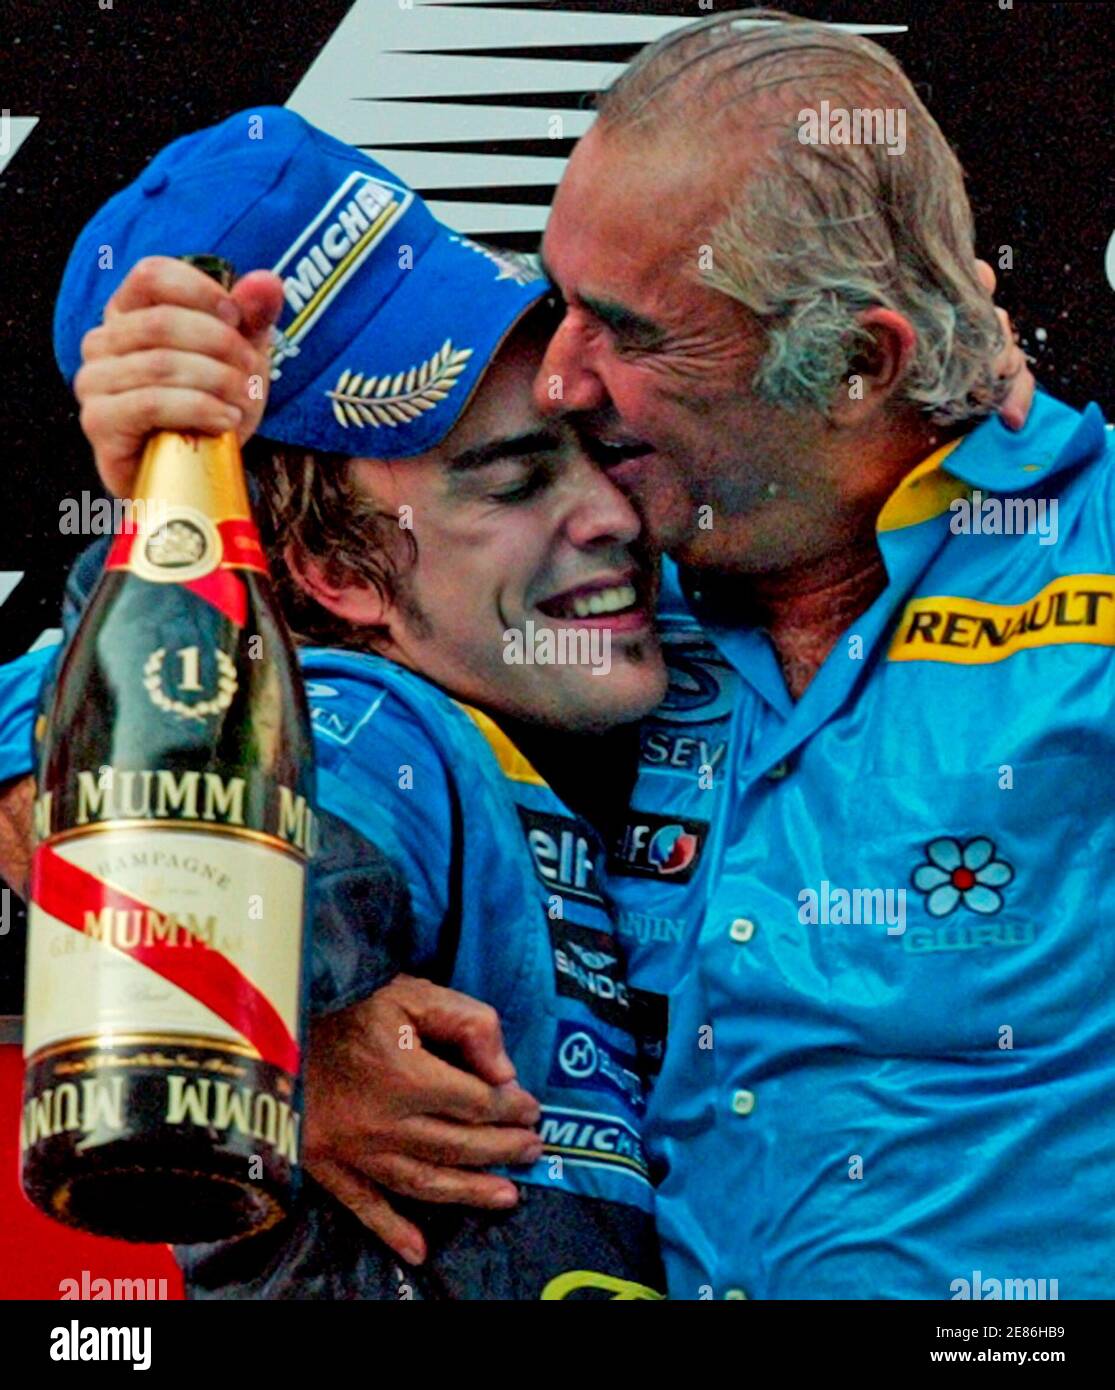 Renault's World Champion Formula One driver Fernando Alonso of Spain (L)  celebrates on the podium with Renault team managing director Flavio  Briatore after winning the Chinese Grand Prix in Shanghai October 16,